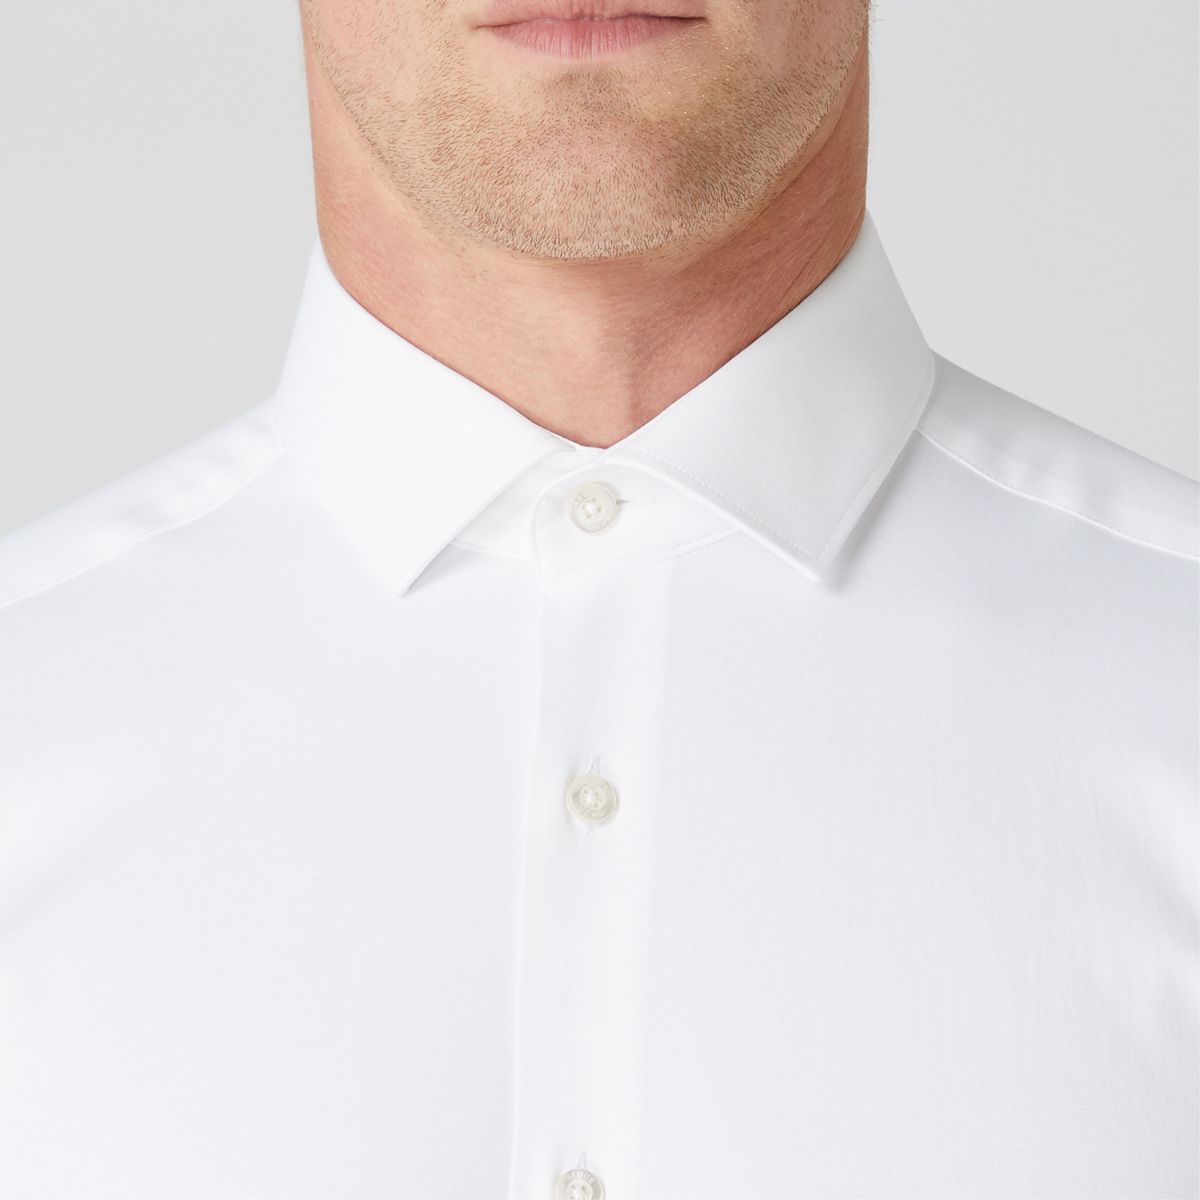 Remus Uomo Tapered Fit Cotton Stretch Shirt - White